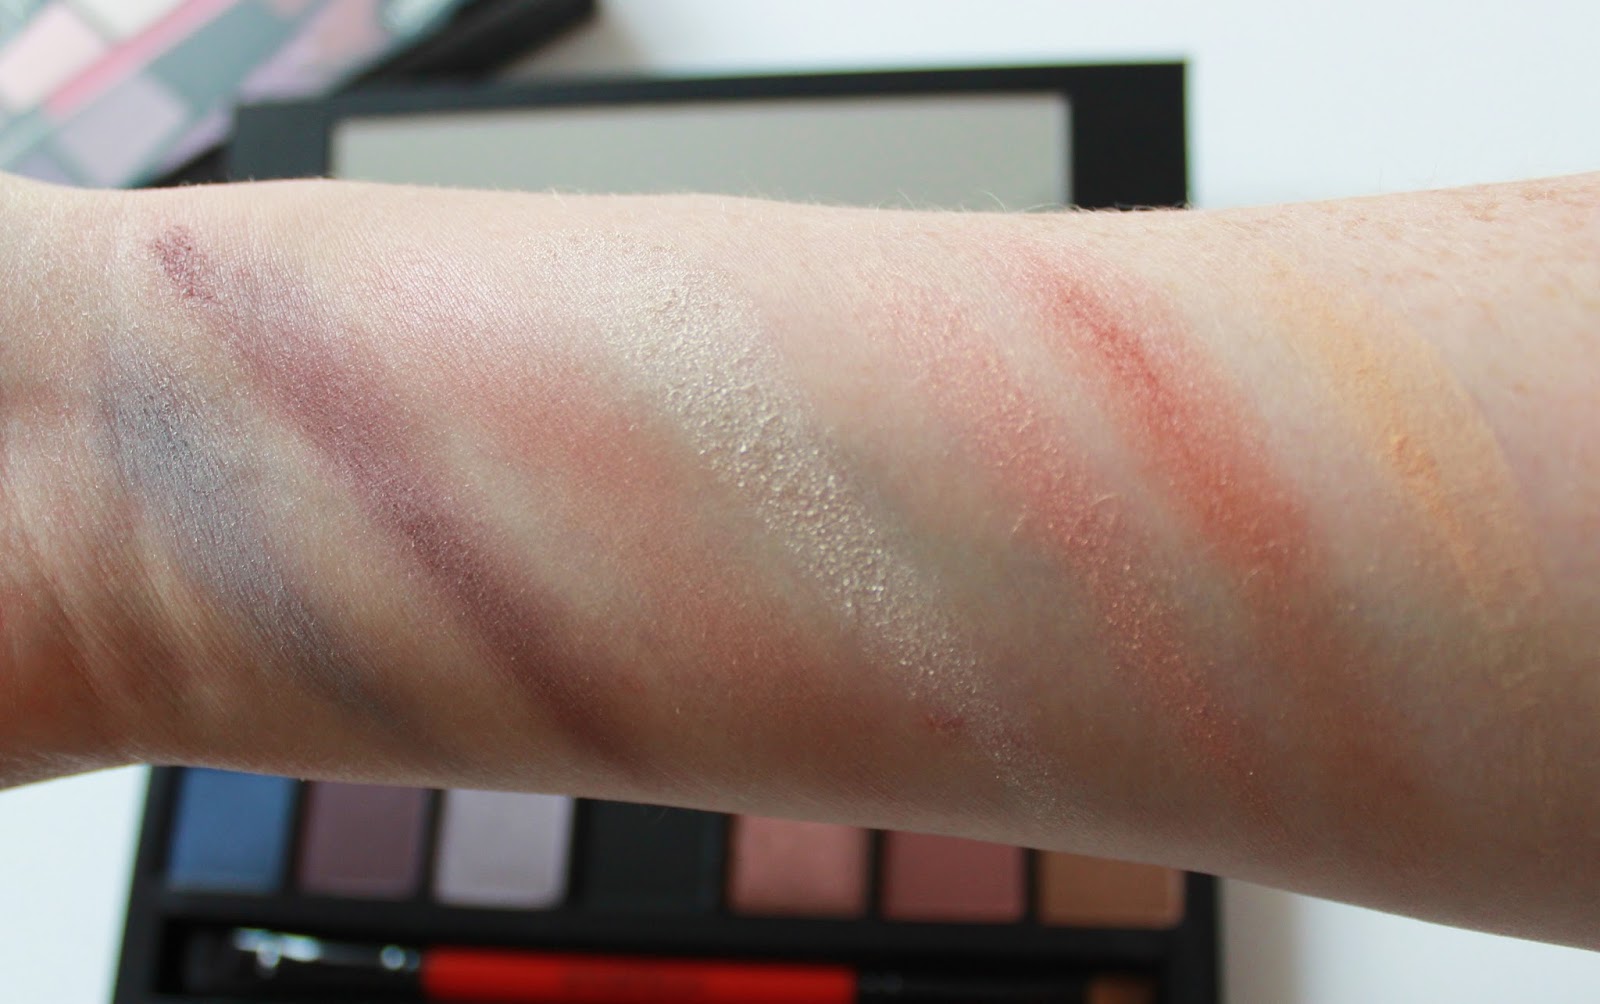 Smashbox double exposure eye shadow palette swatches top row